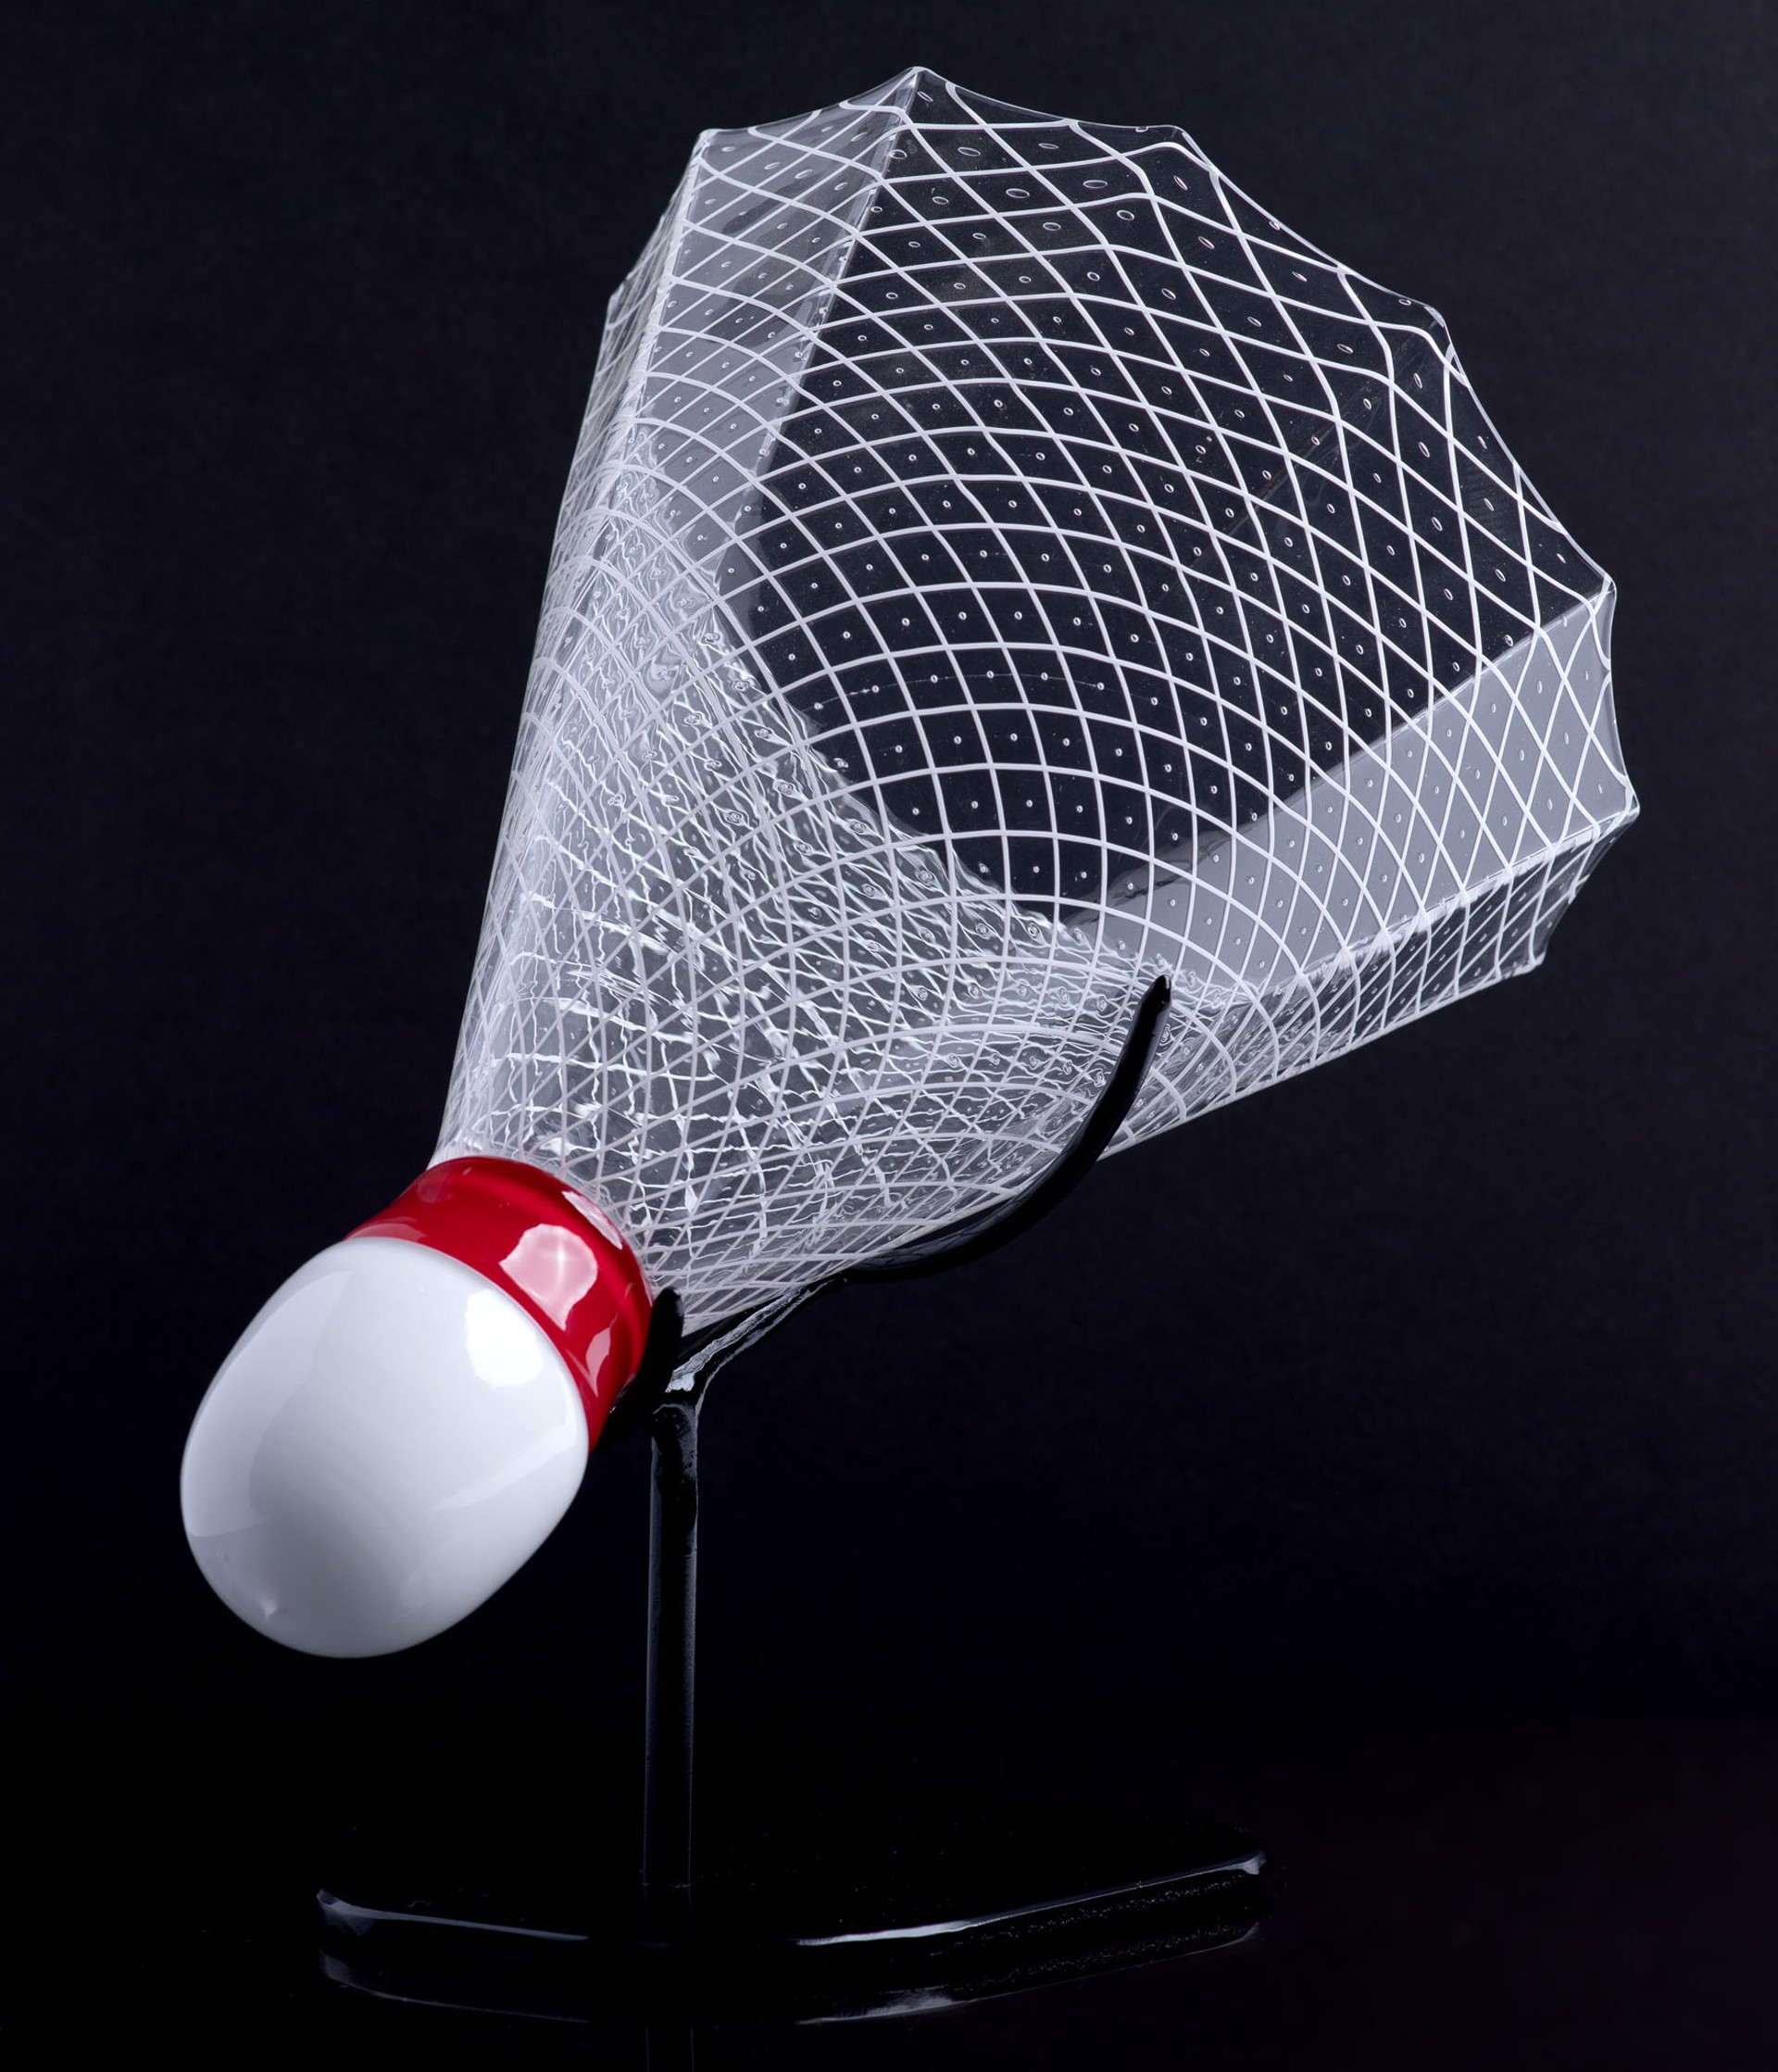 Red-Collar Reticello Shuttlecock by Tyler Kimball